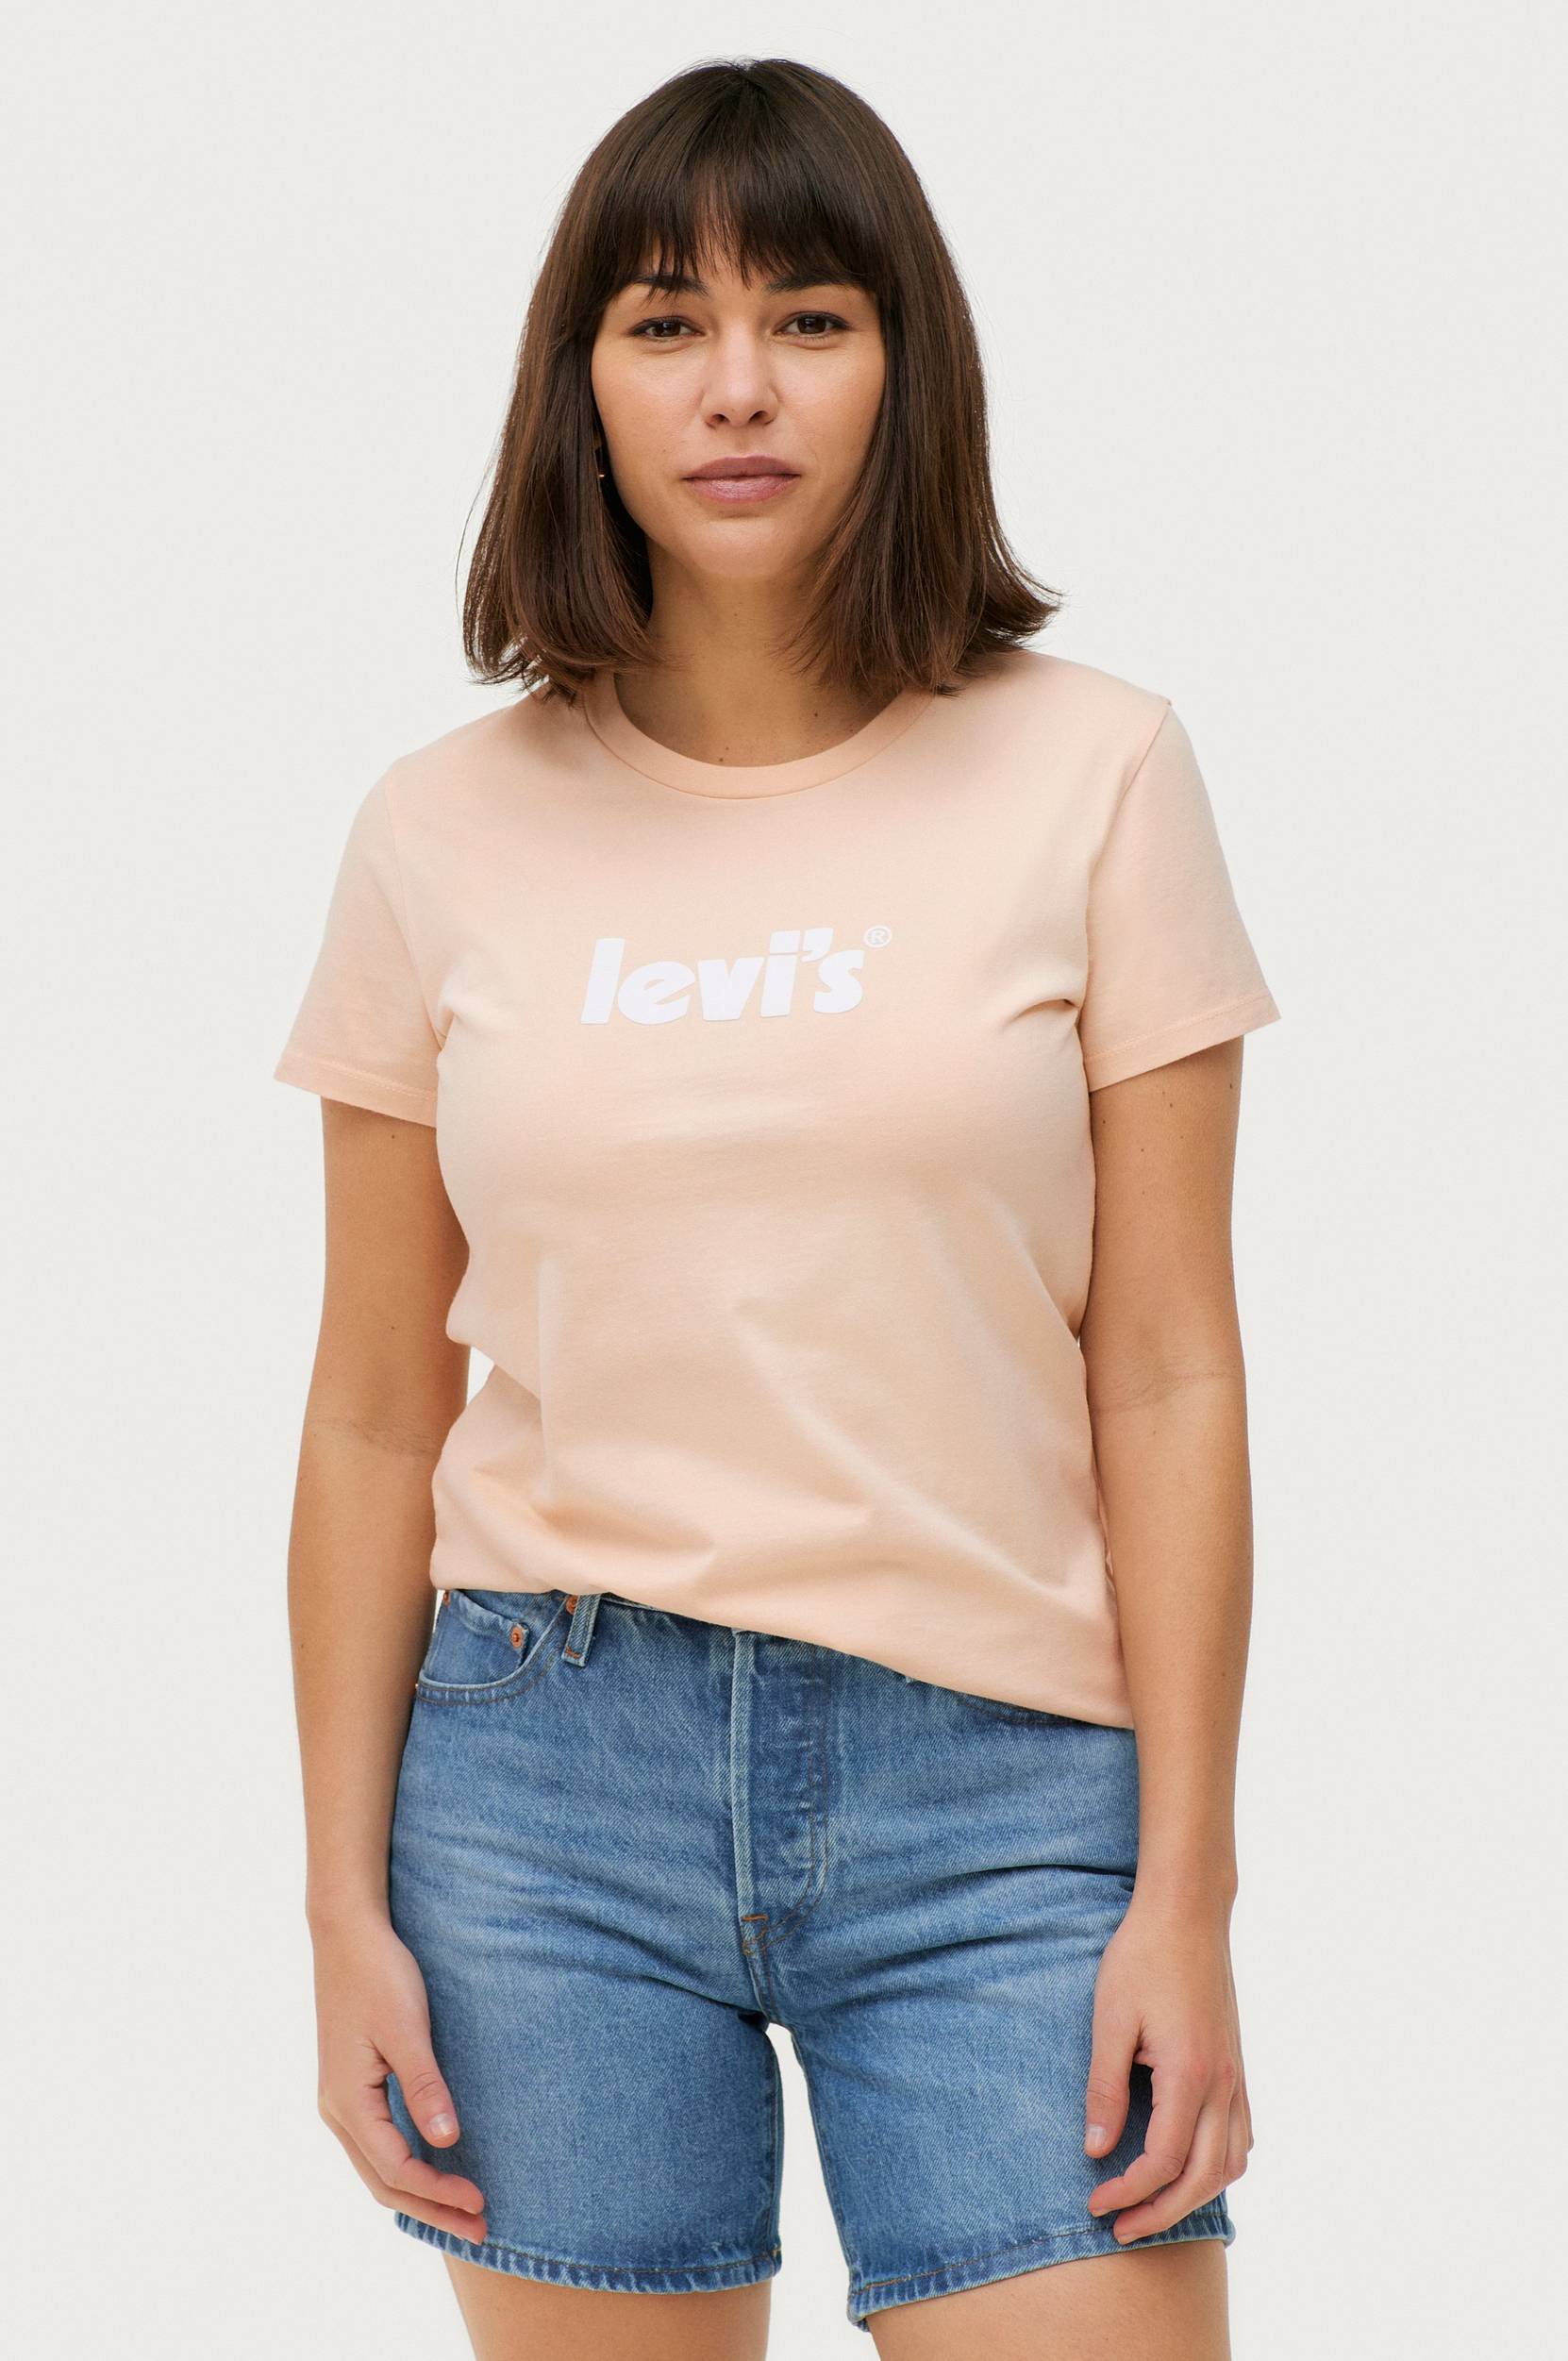 Levi's - Top The Perfect Tee - Rosa - 36